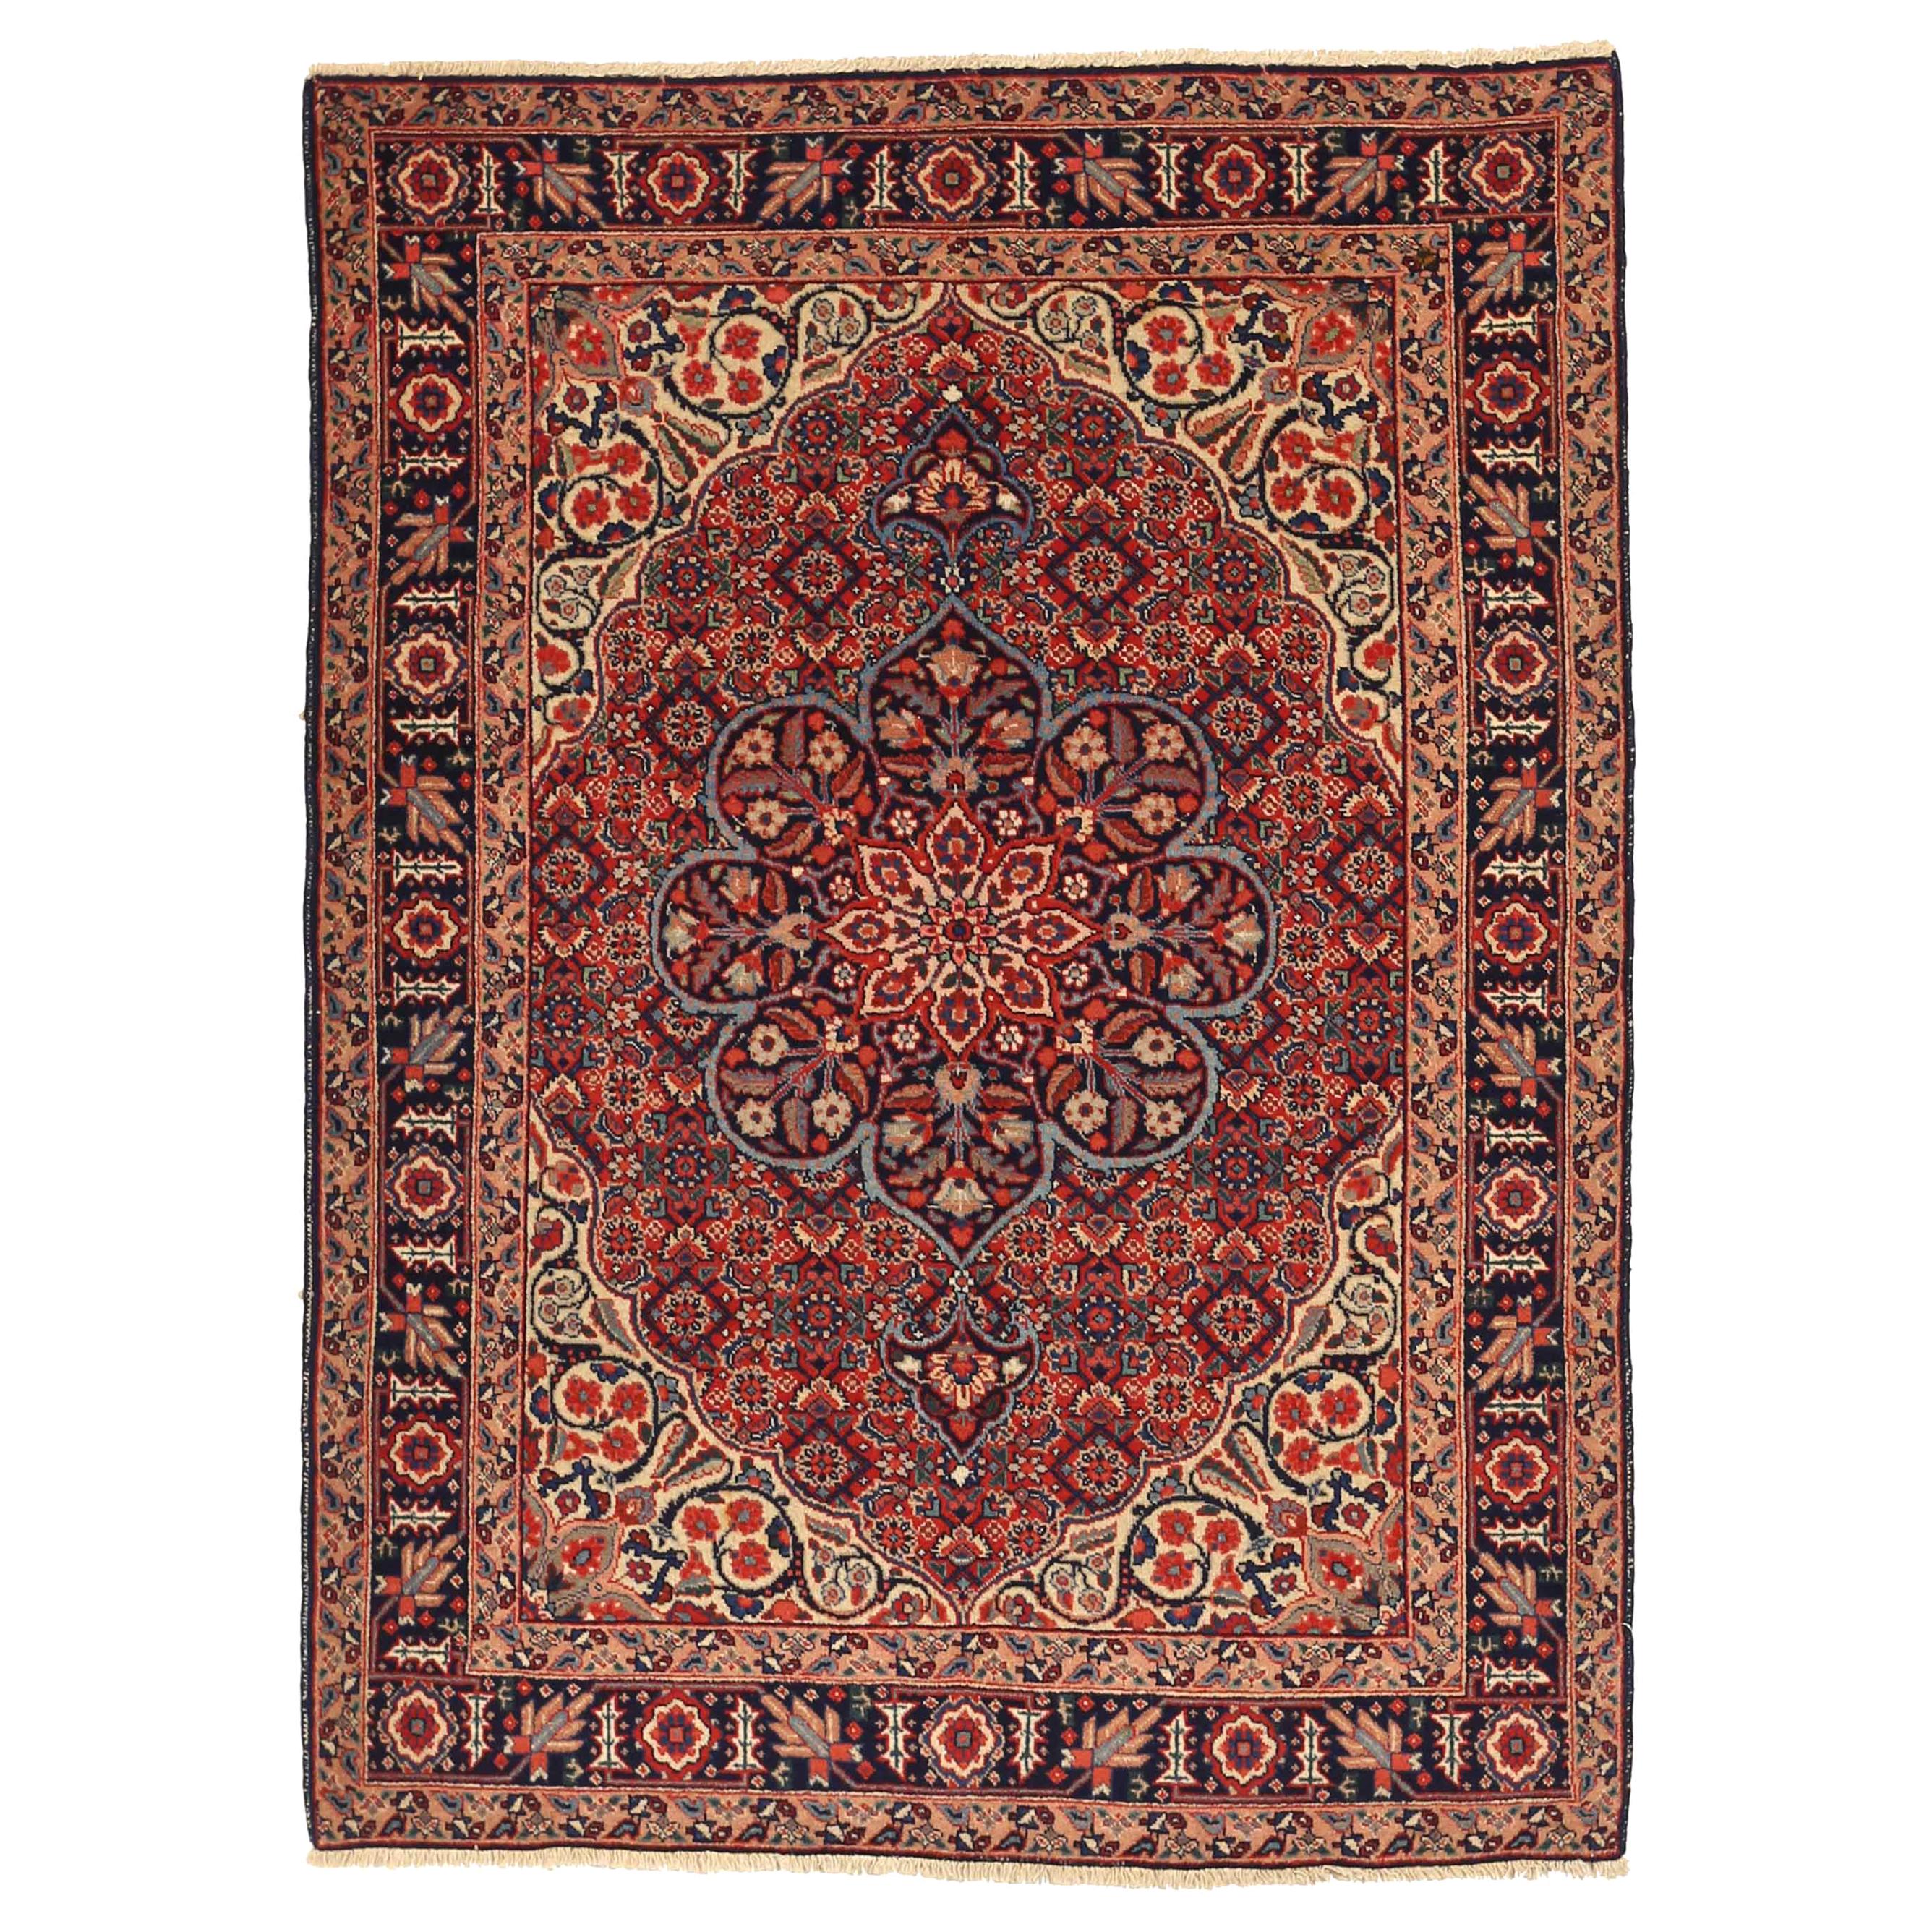 Antique Persian Tabriz Rug in Red, Black & Ivory Floral Patterns All-Over